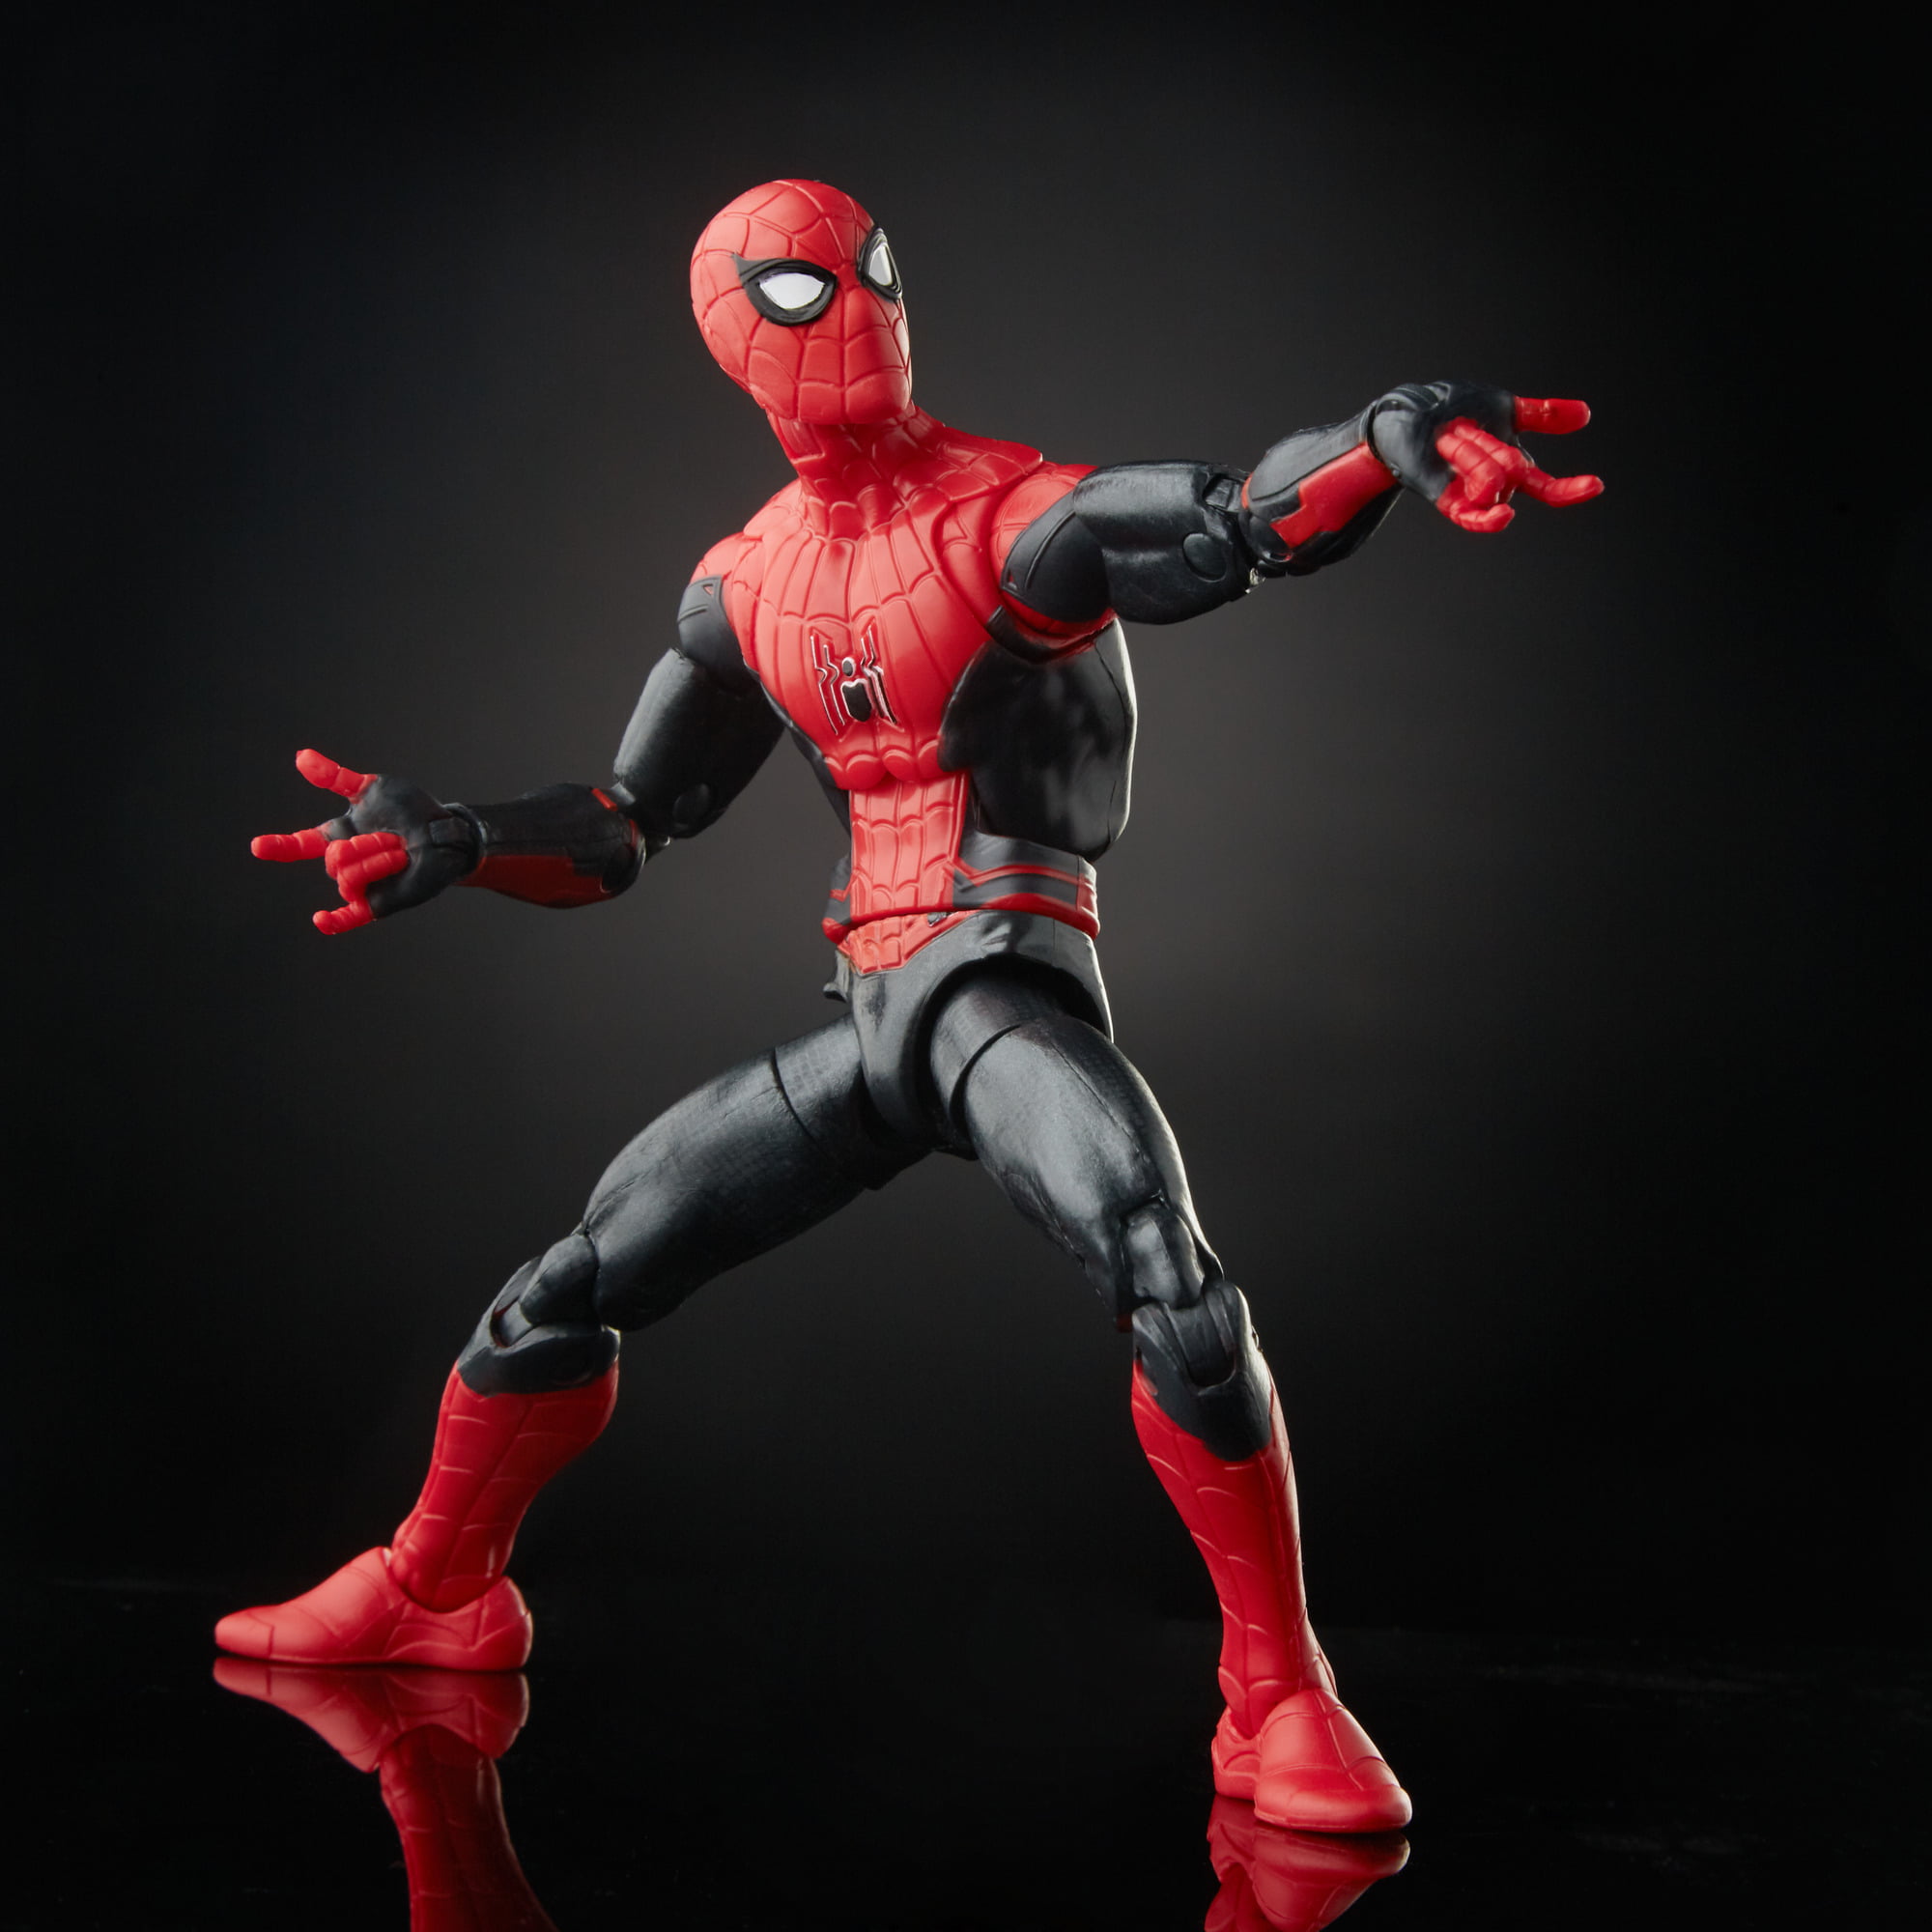 far from home marvel legends